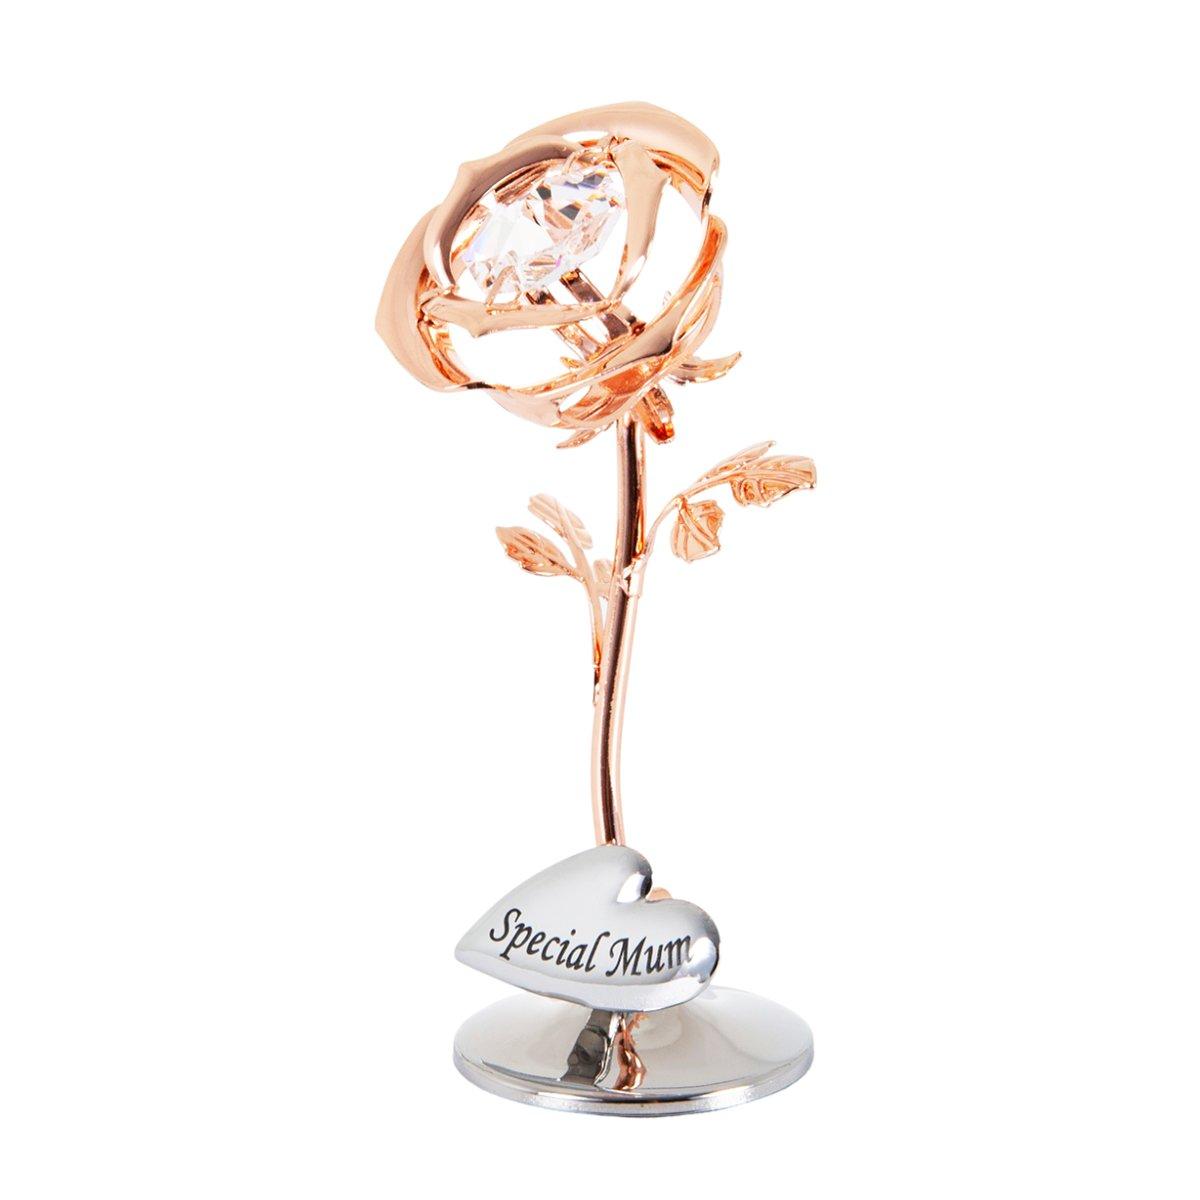 Special Mum Heart Copper Plated Petite Rose Ornament with Clear Austrian Crystal by Happy Homewares